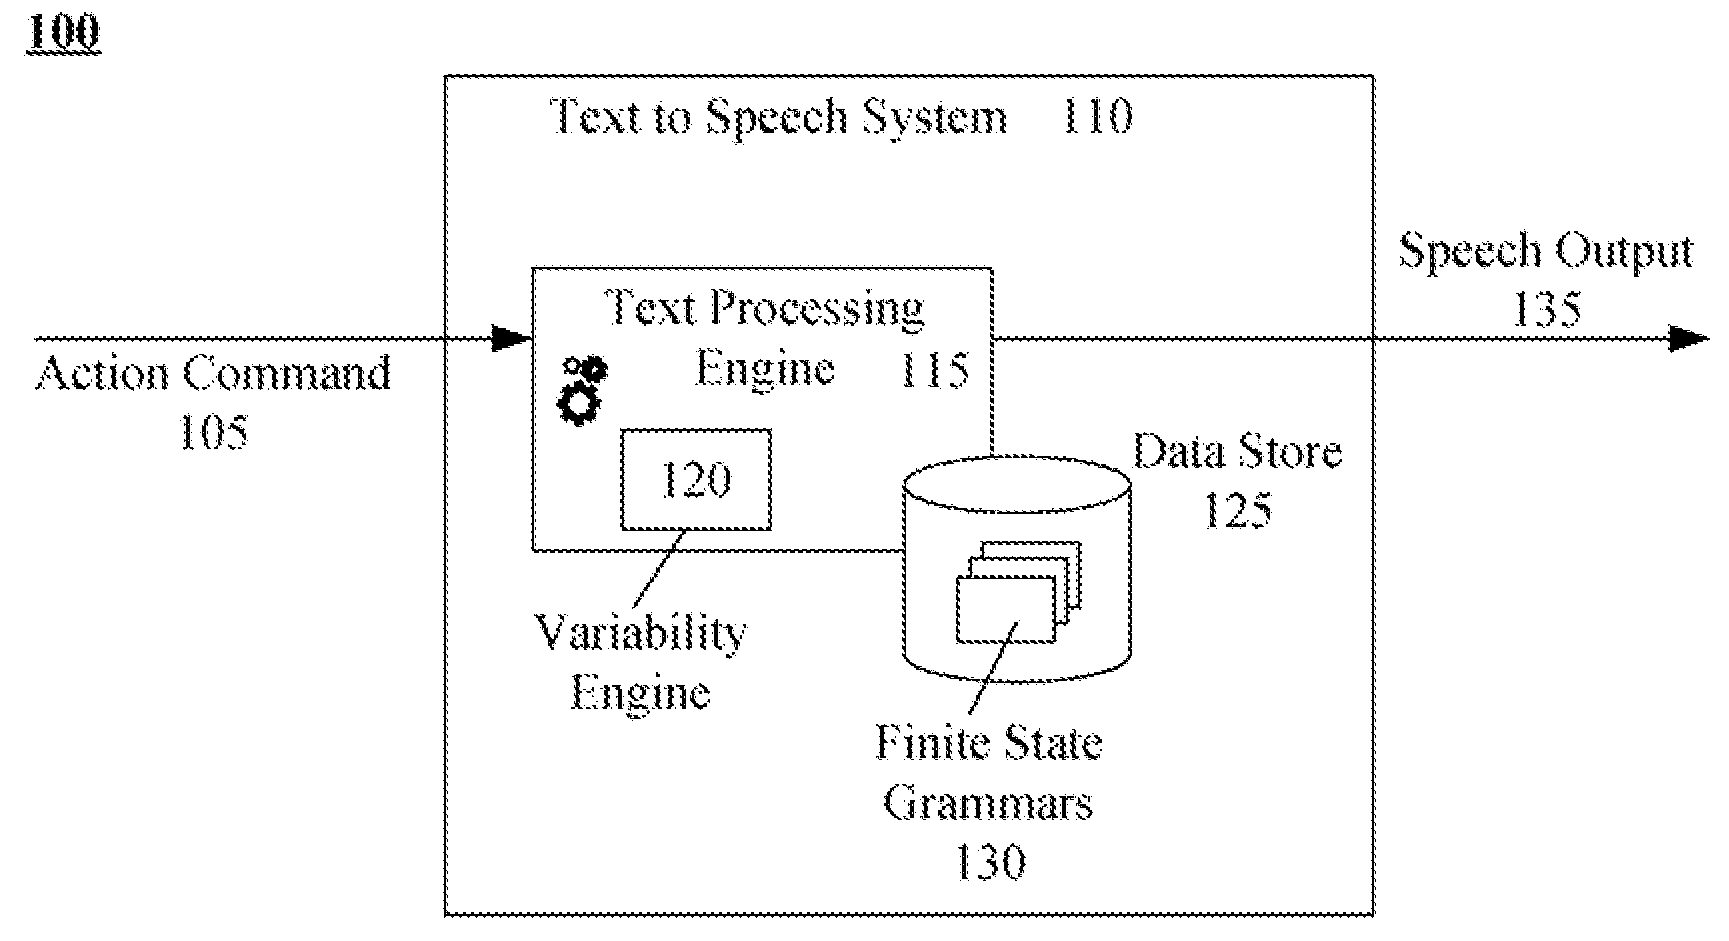 Using finite state grammars to vary output generated by a text-to-speech system